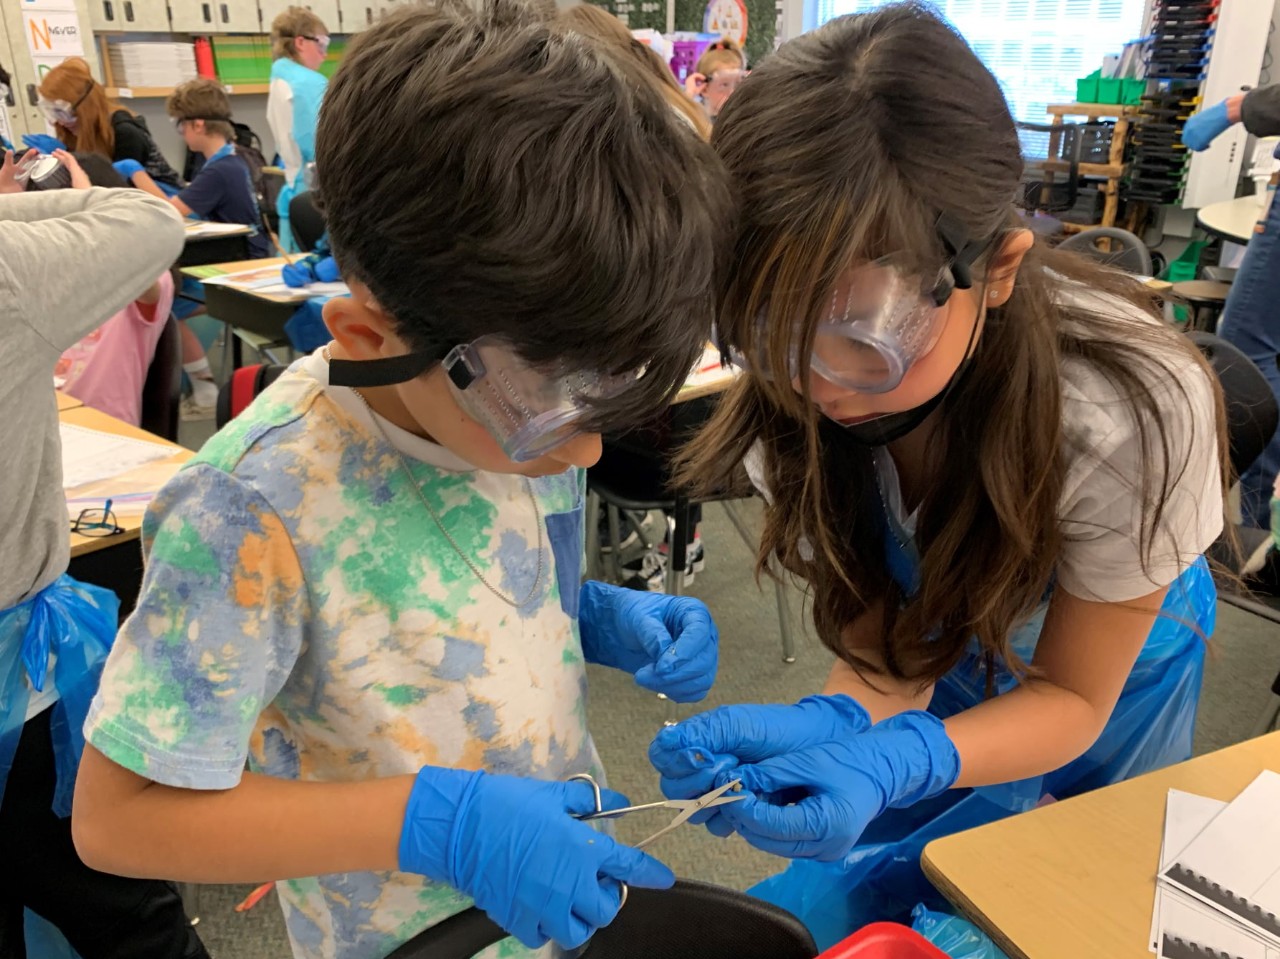 Students in a science class wearing gloves and safety goggles